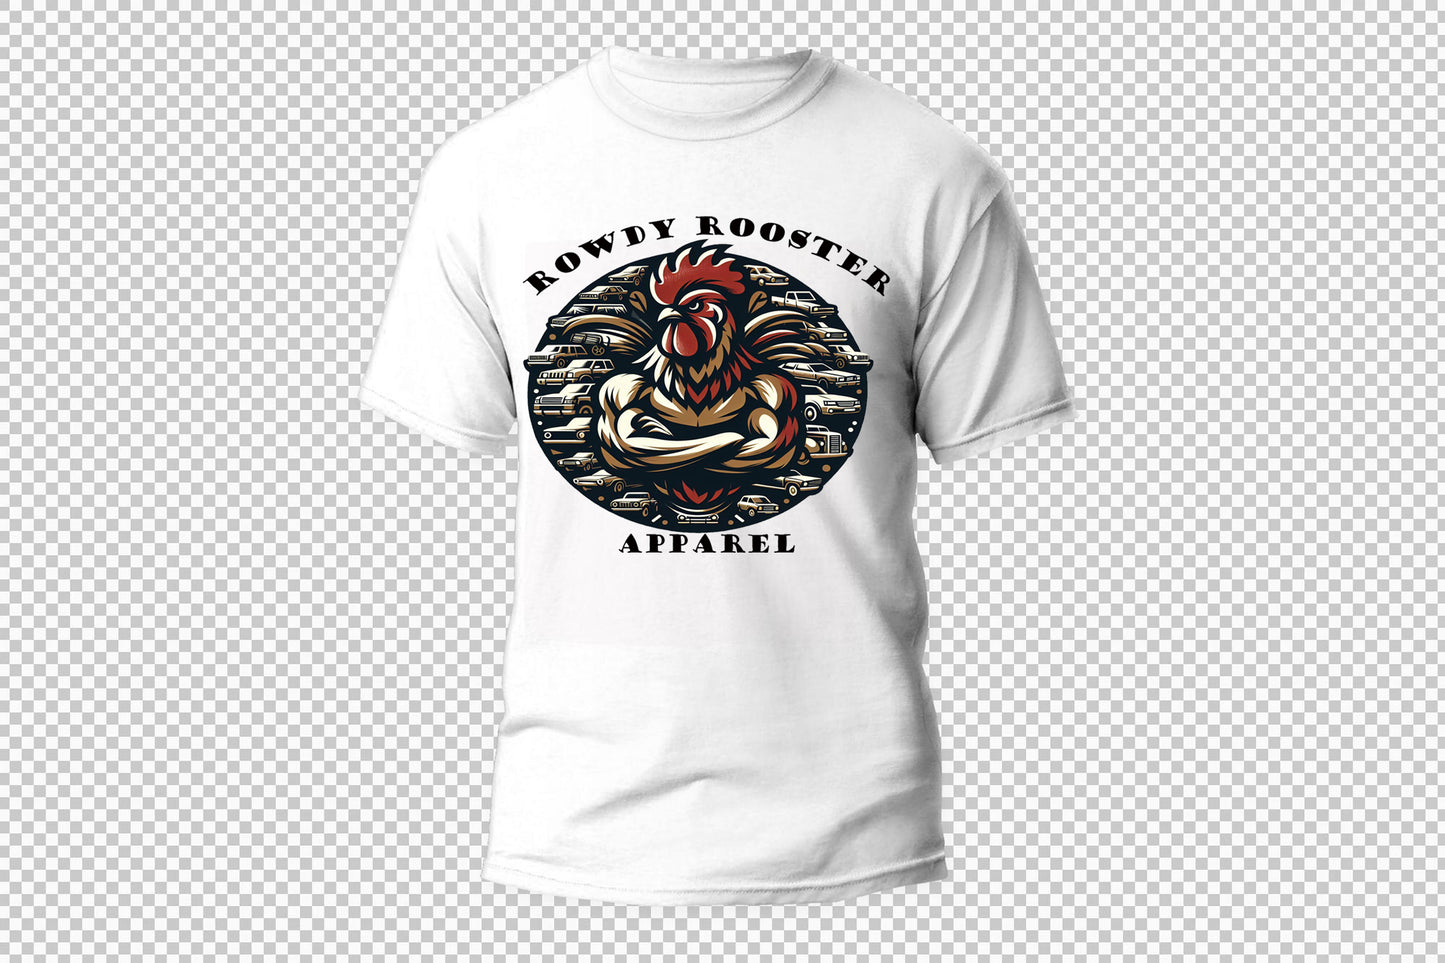 ROWDY ROOSTER SHIRT